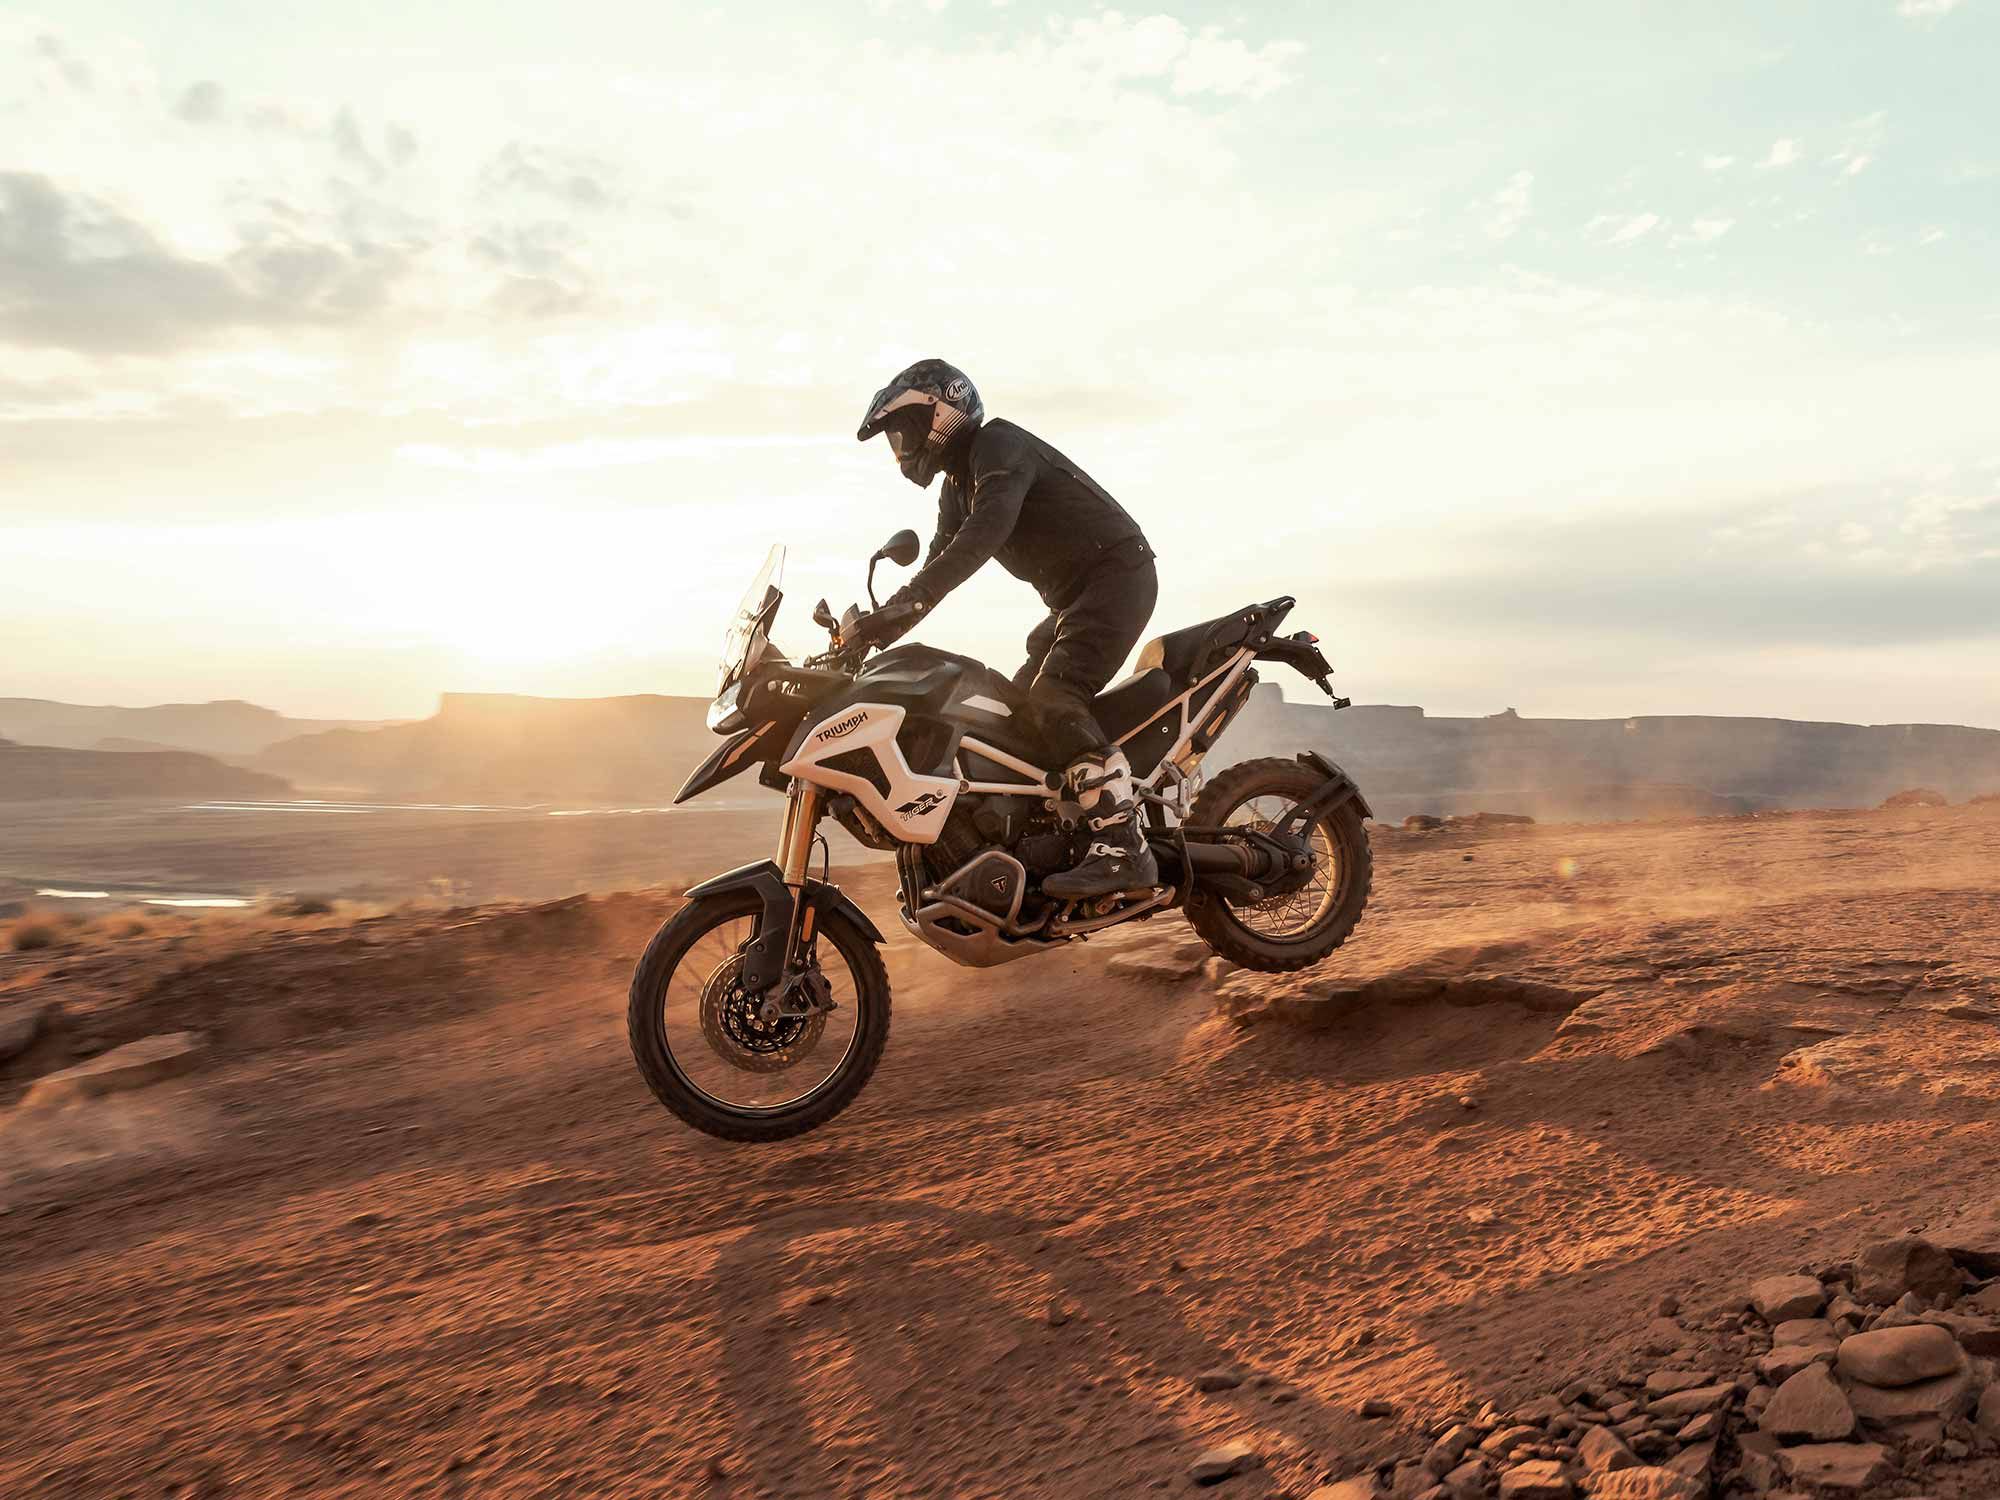 The 2022 Triumph Tiger 1200 Rally Pro shares many of the off-road build features as the Explorer.